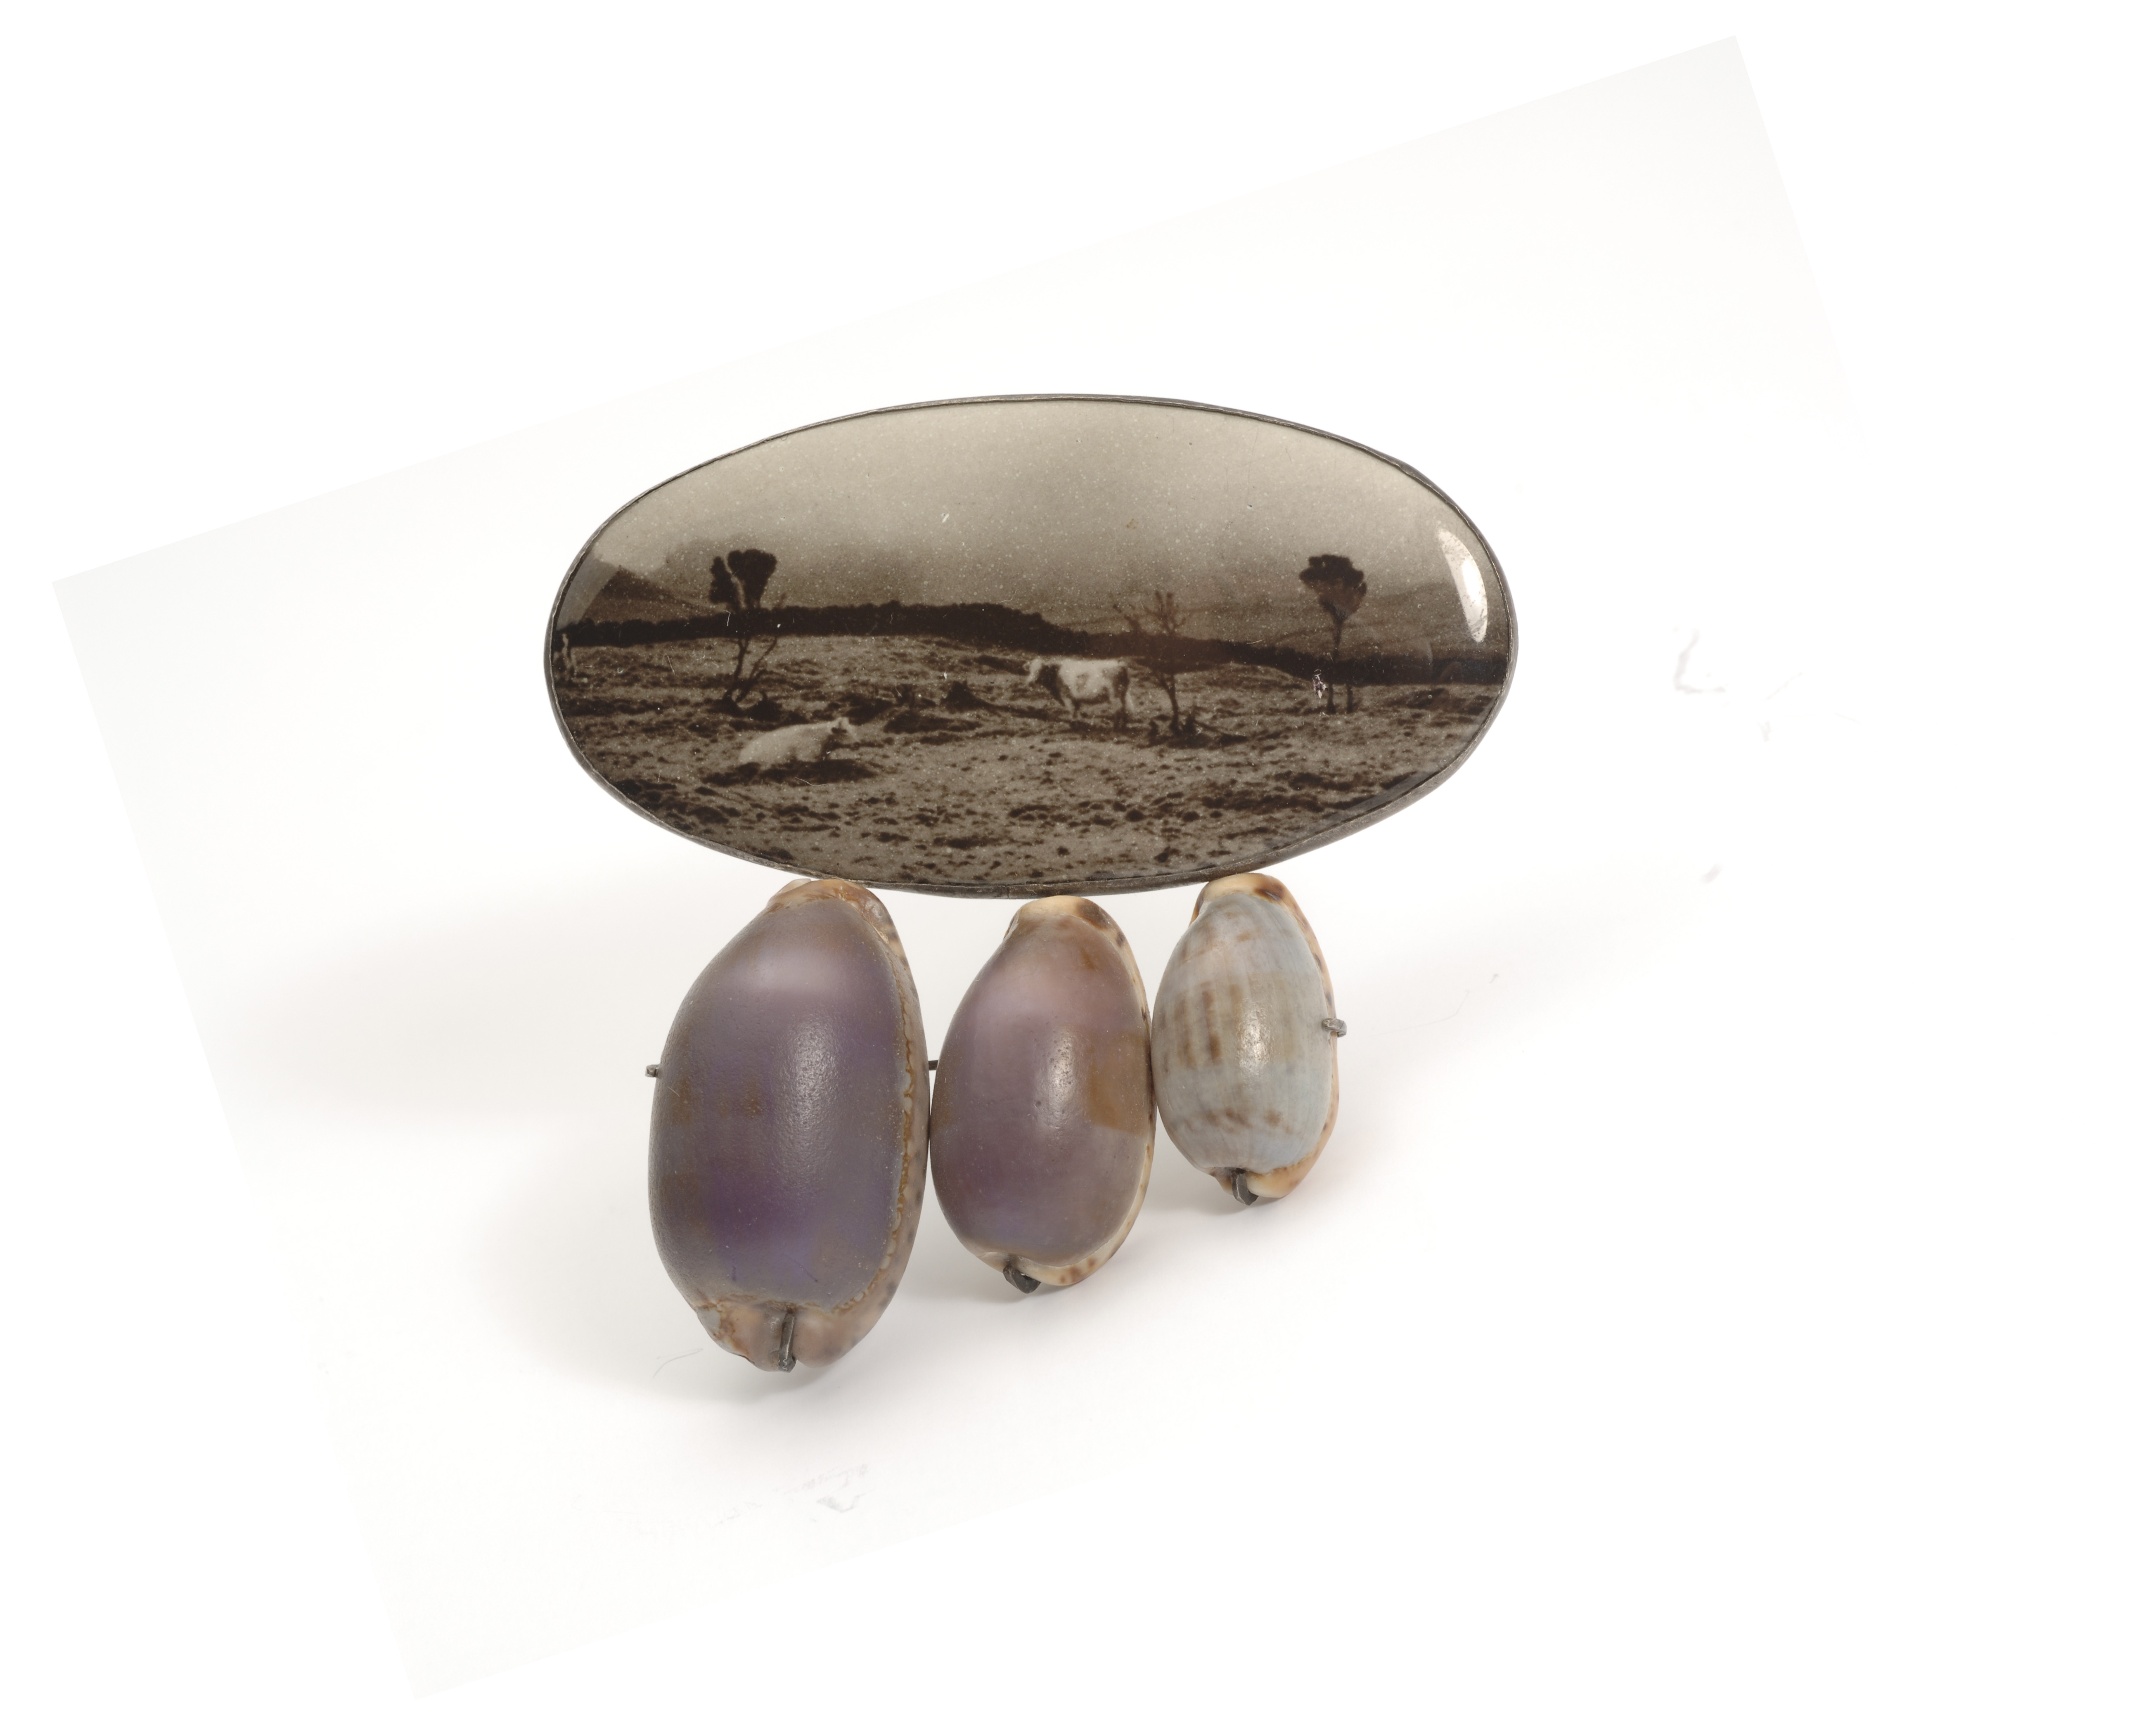 Bettina Speckner, "Untitled" Brooch (2004). Artist’s photograph enameled on silver, cowrie shells, amethysts. Courtesy of a private collection. Photo credit: Bettina Speckner, Museum of Arts and Design.